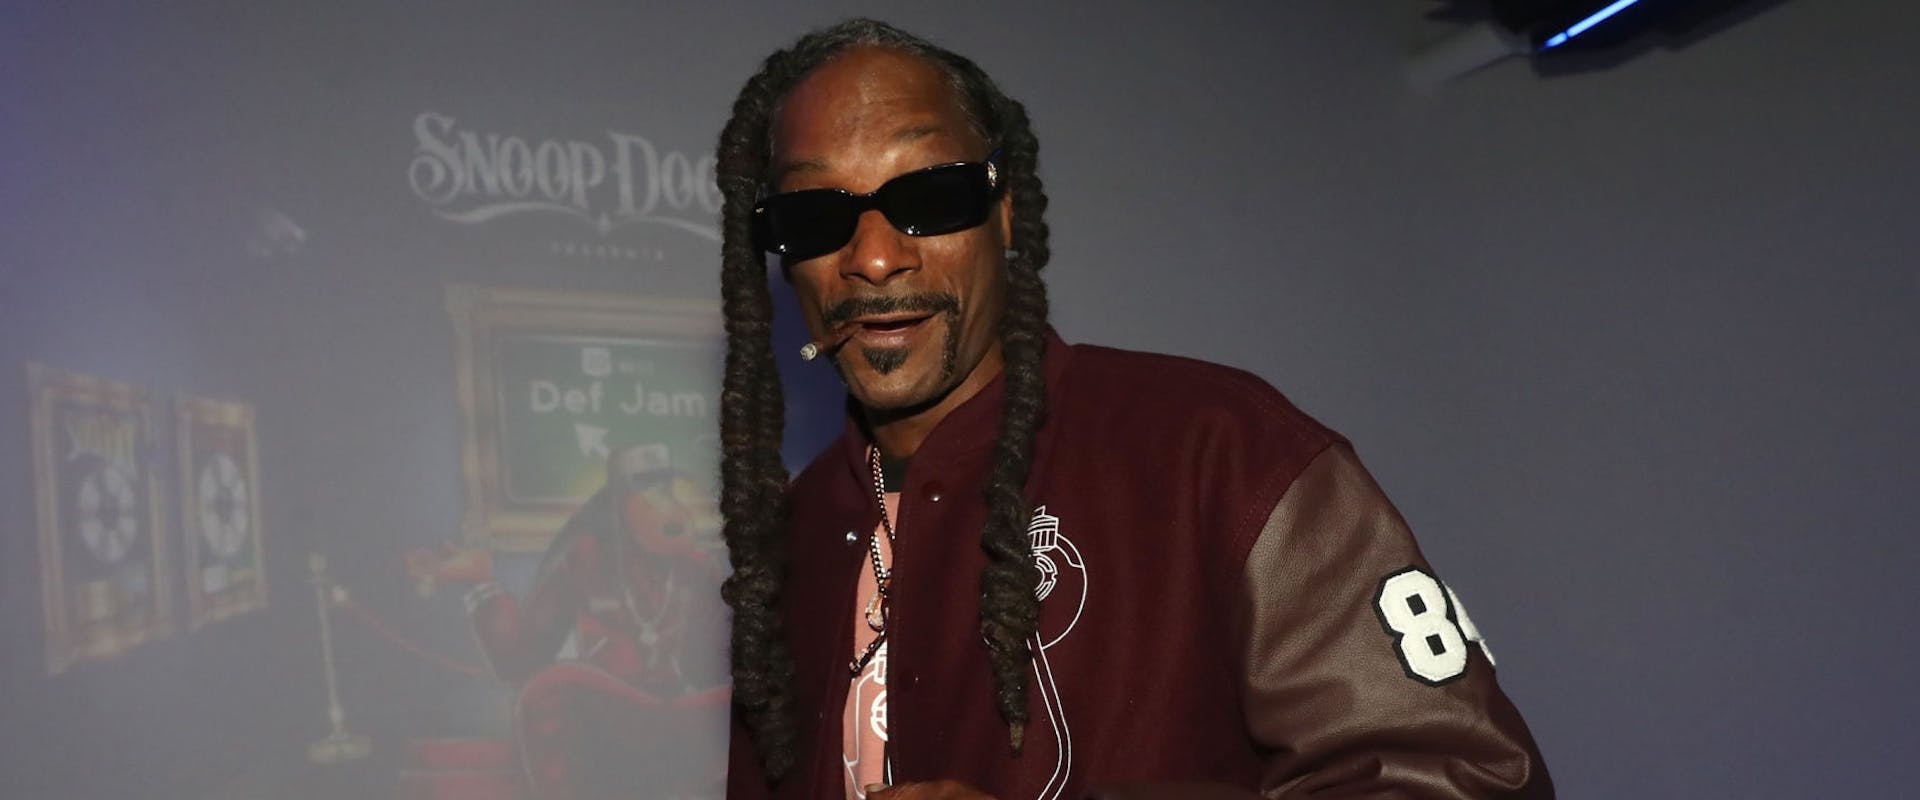 Snoop Dogg attends his "Algorithm" Listening Session on October 26, 2021 in New York City.